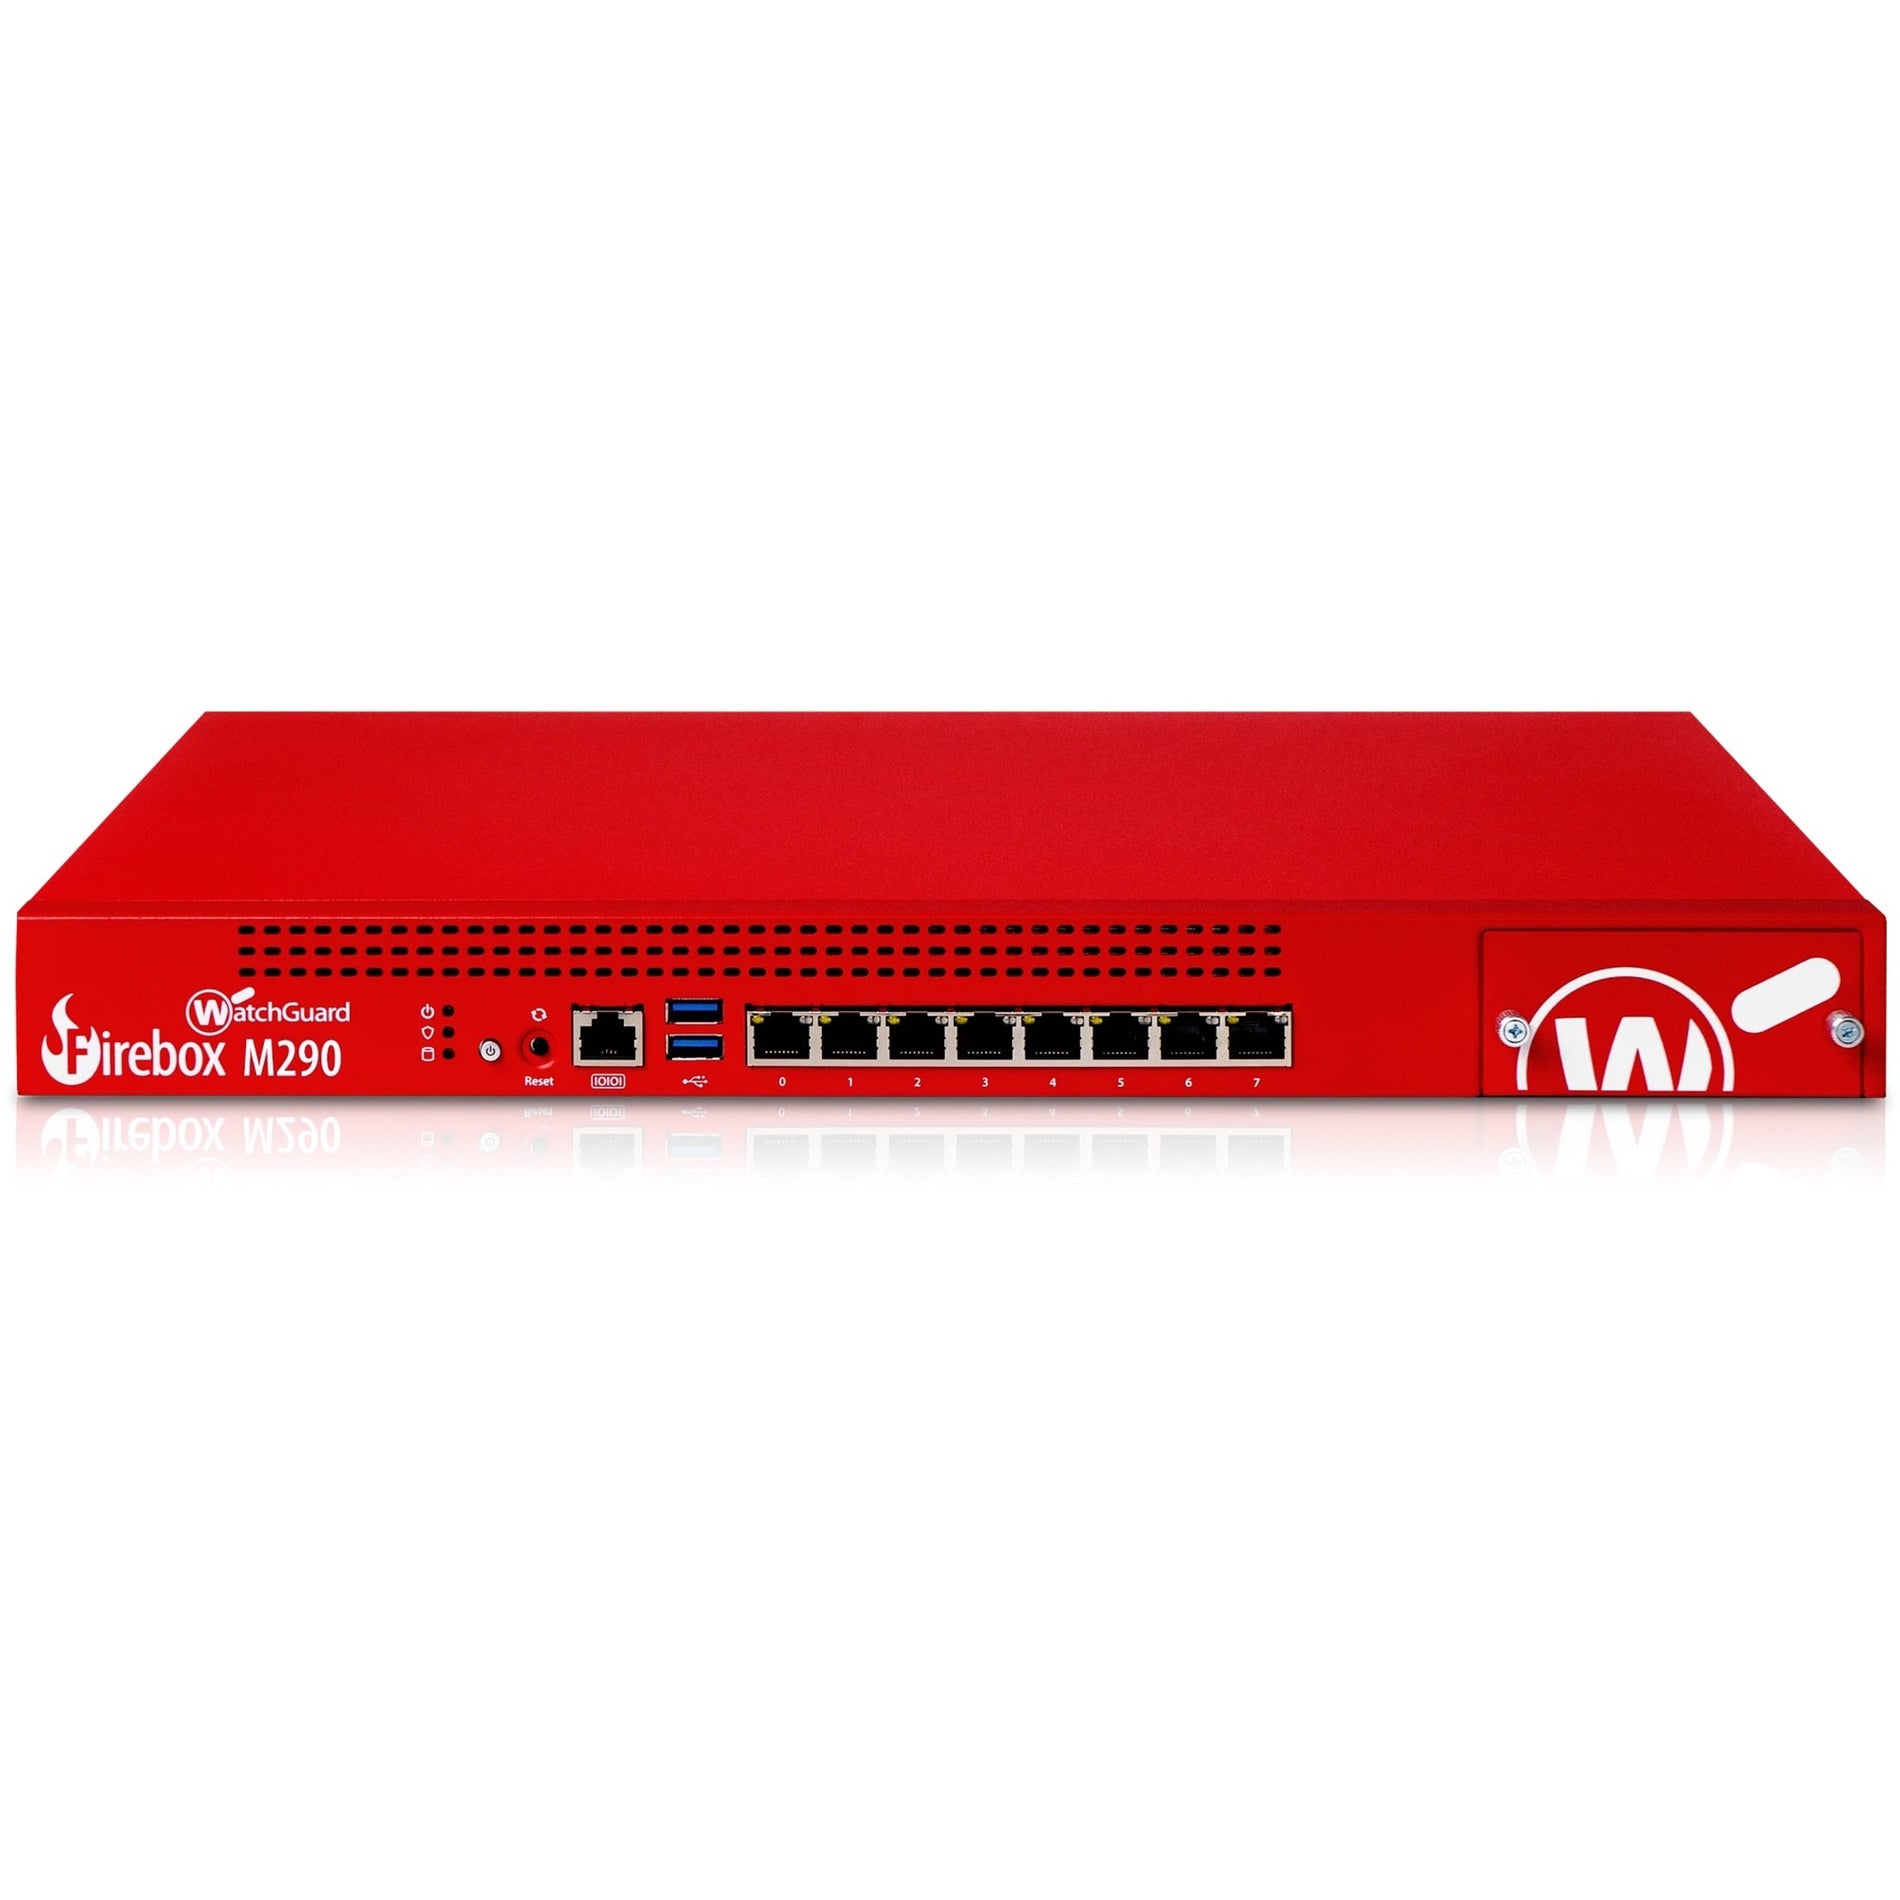 WatchGuard WGM29000701 Firebox M290 Network Security/Firewall Appliance, 8 Ports, 1 Year Basic Security Suite